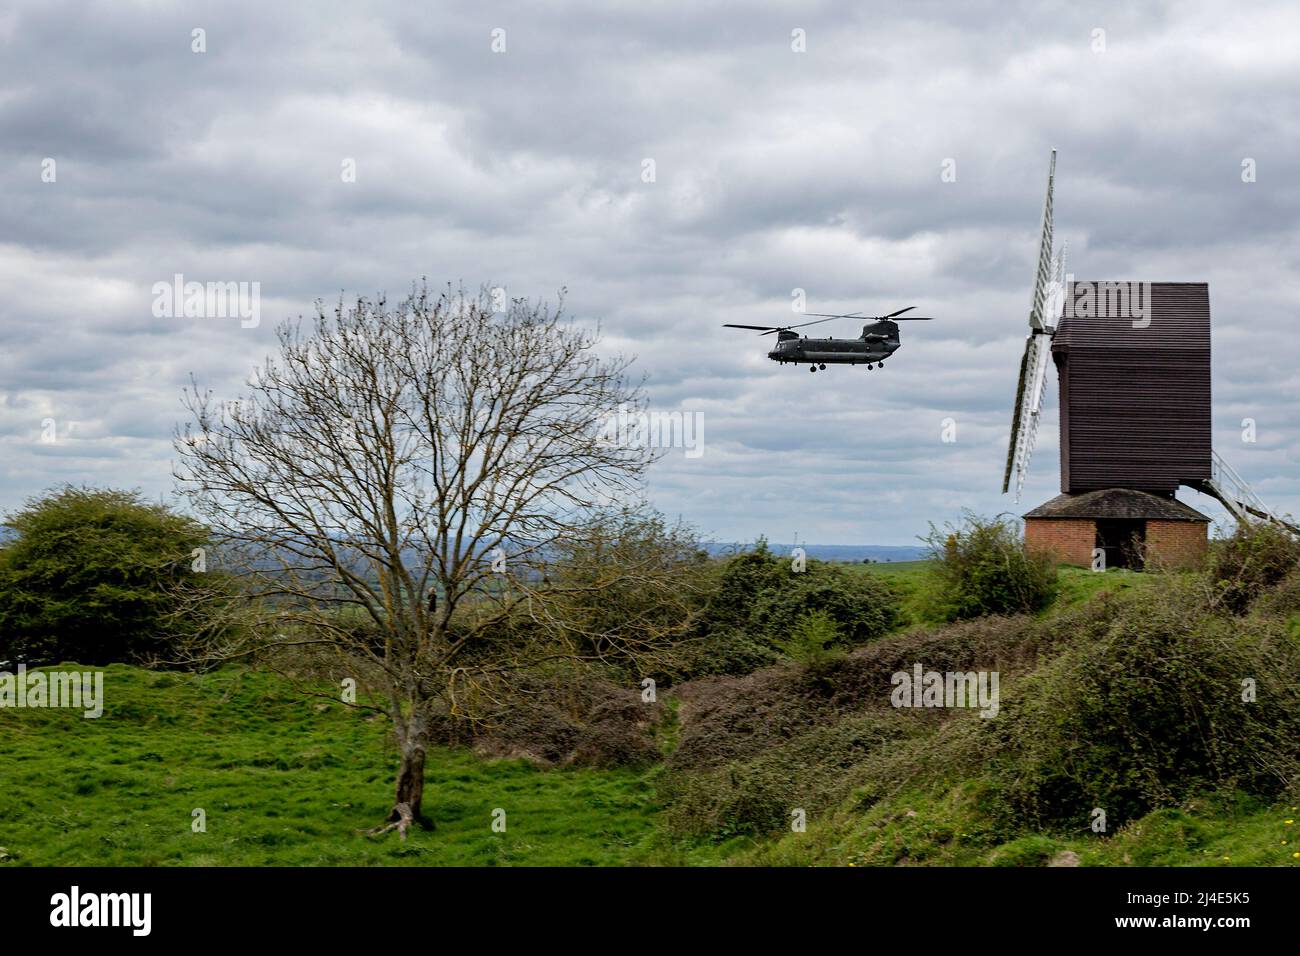 A Royal Air Force CH-47 Chinook helicopter flies low and close past the windmill at Brill, Buckinghamshire, UK on a spring day with low grey clouds. Stock Photo